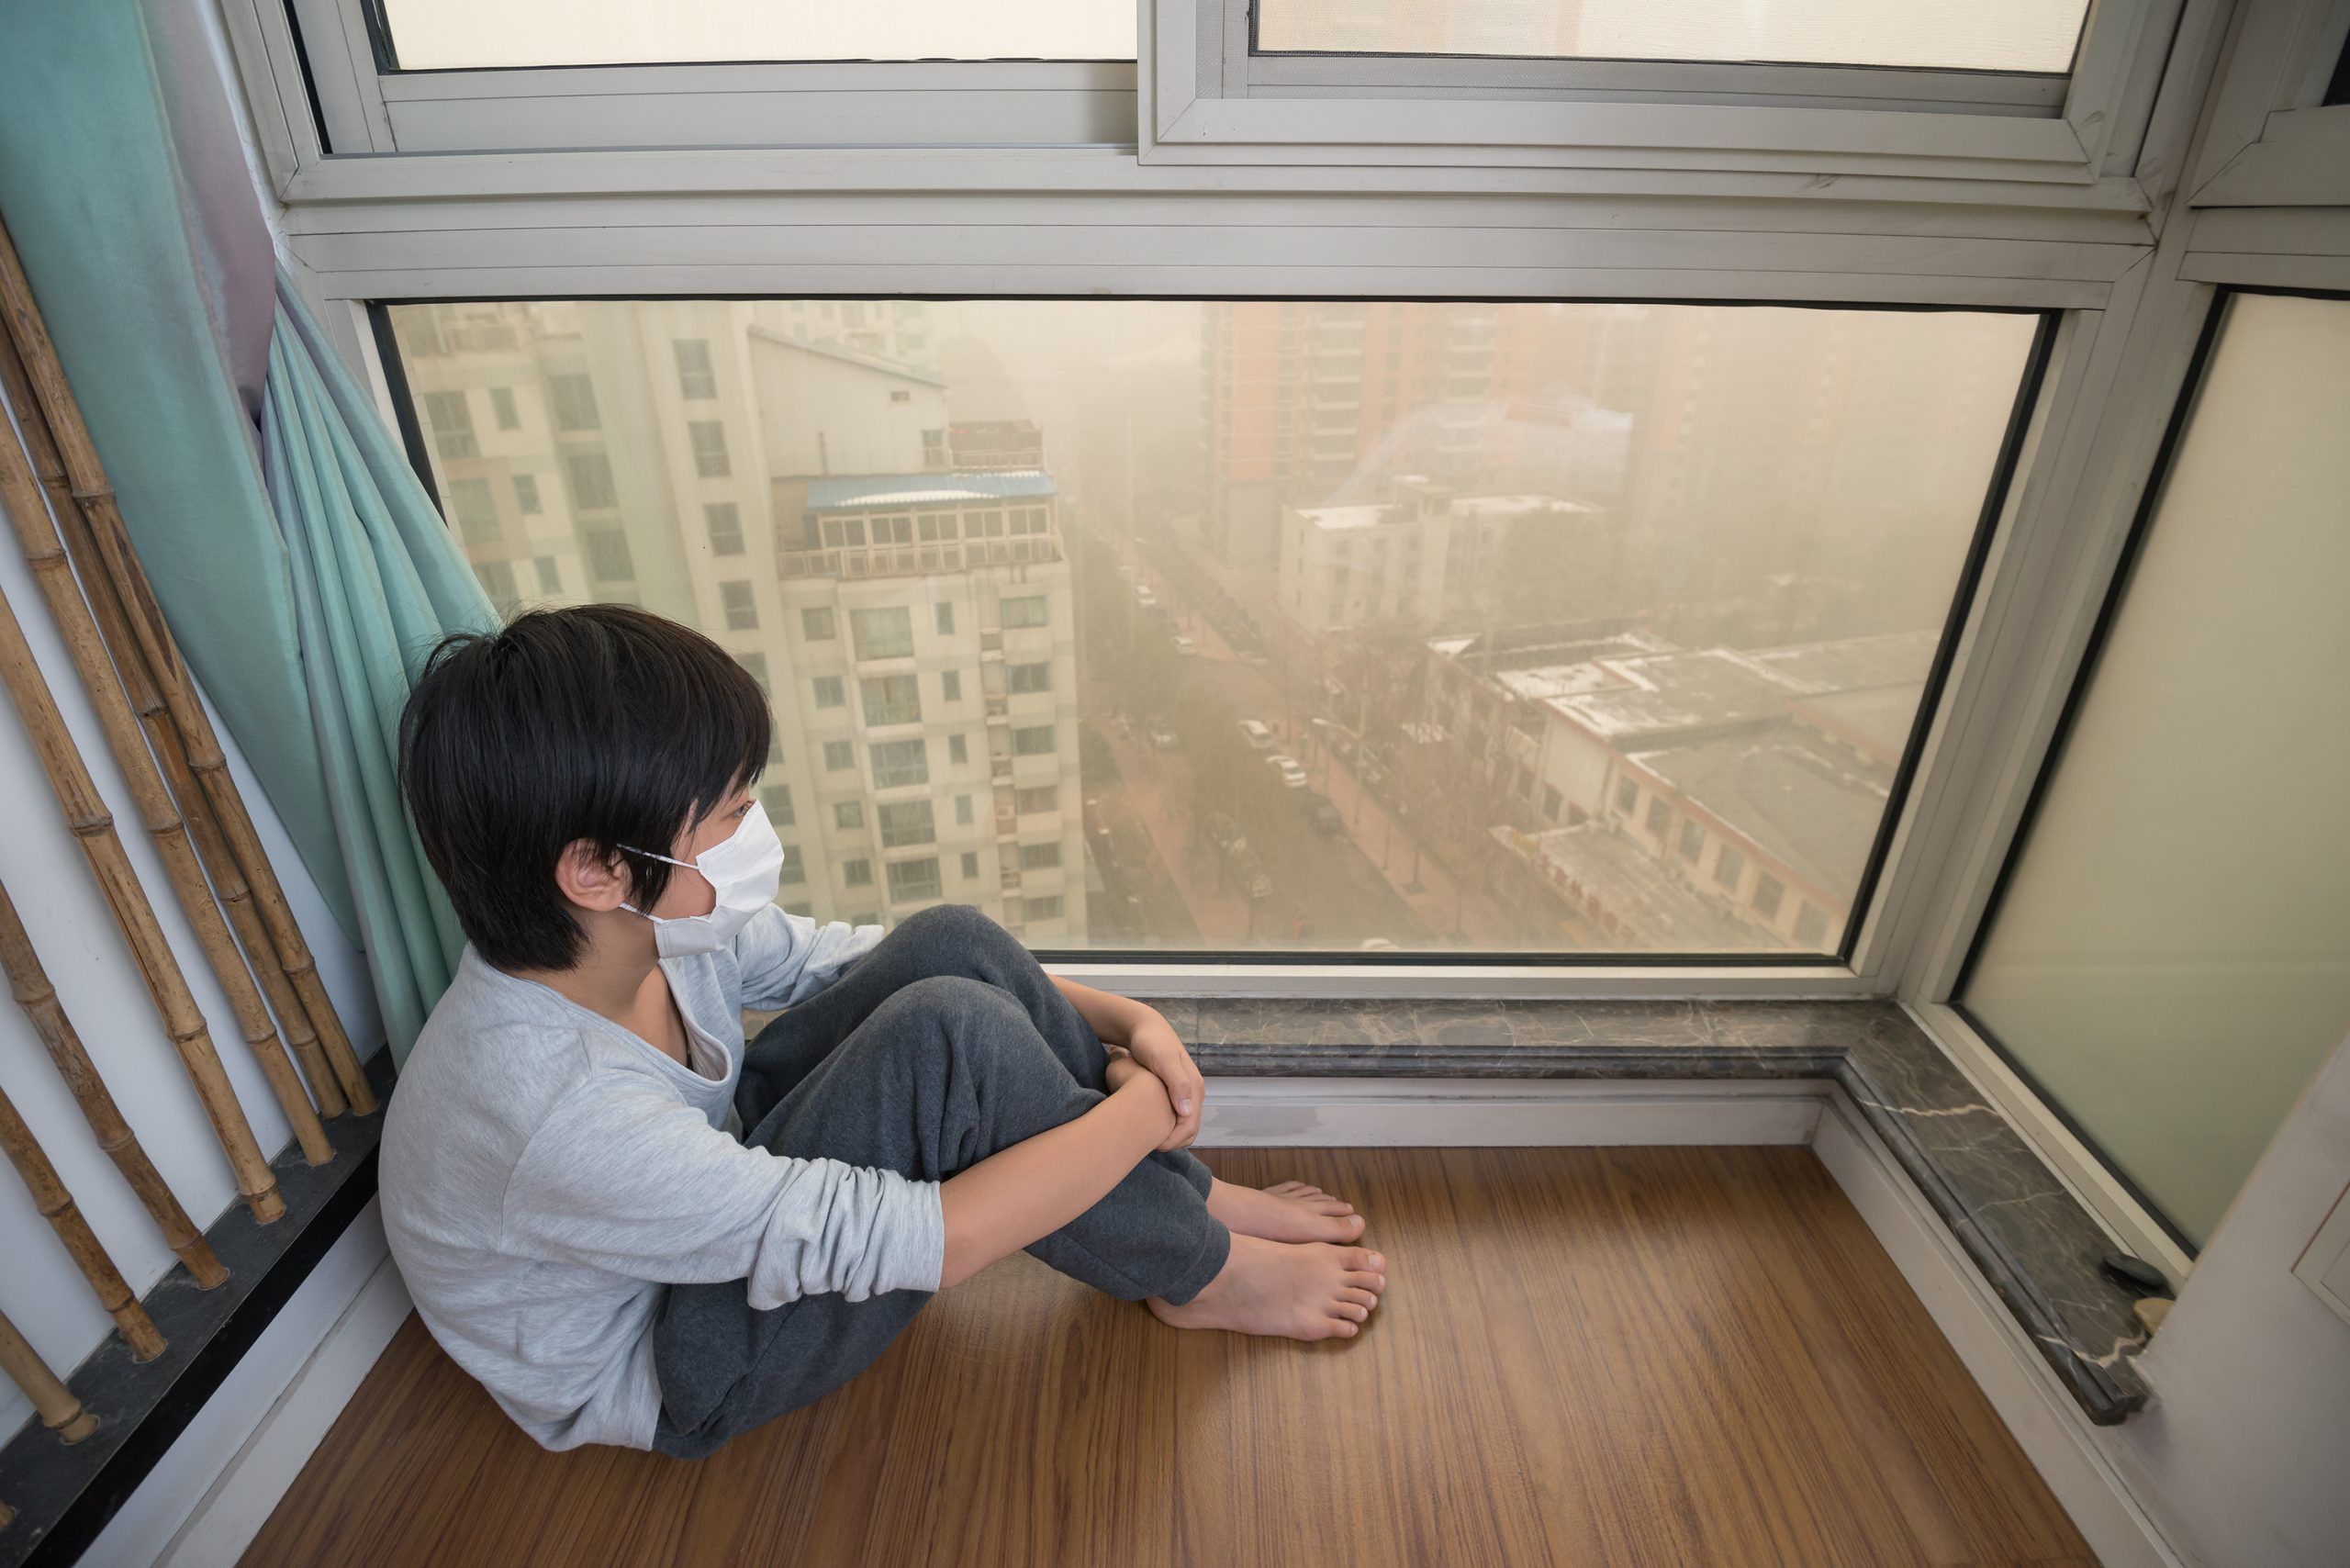 Indoor Air Pollution Just as Dangerous as Outdoor Pollution